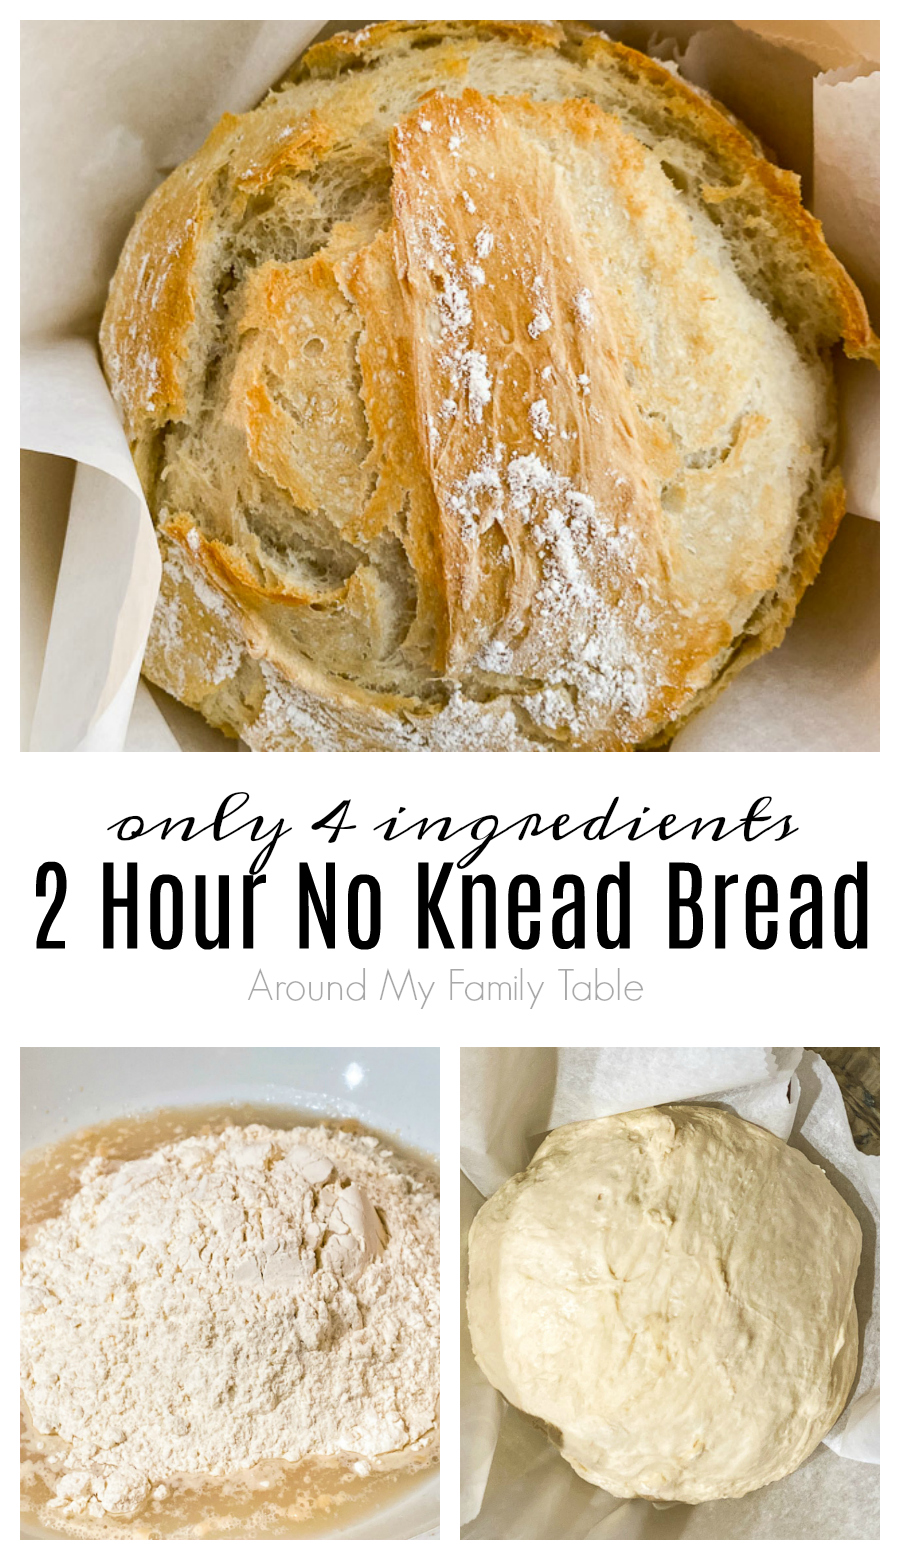 Making bread at home has never been easier than with my recipe for the Easiest 2 Hour No Knead Bread. Only 4 ingredients and 2 hours to hot, delicious bread on your table. via @slingmama